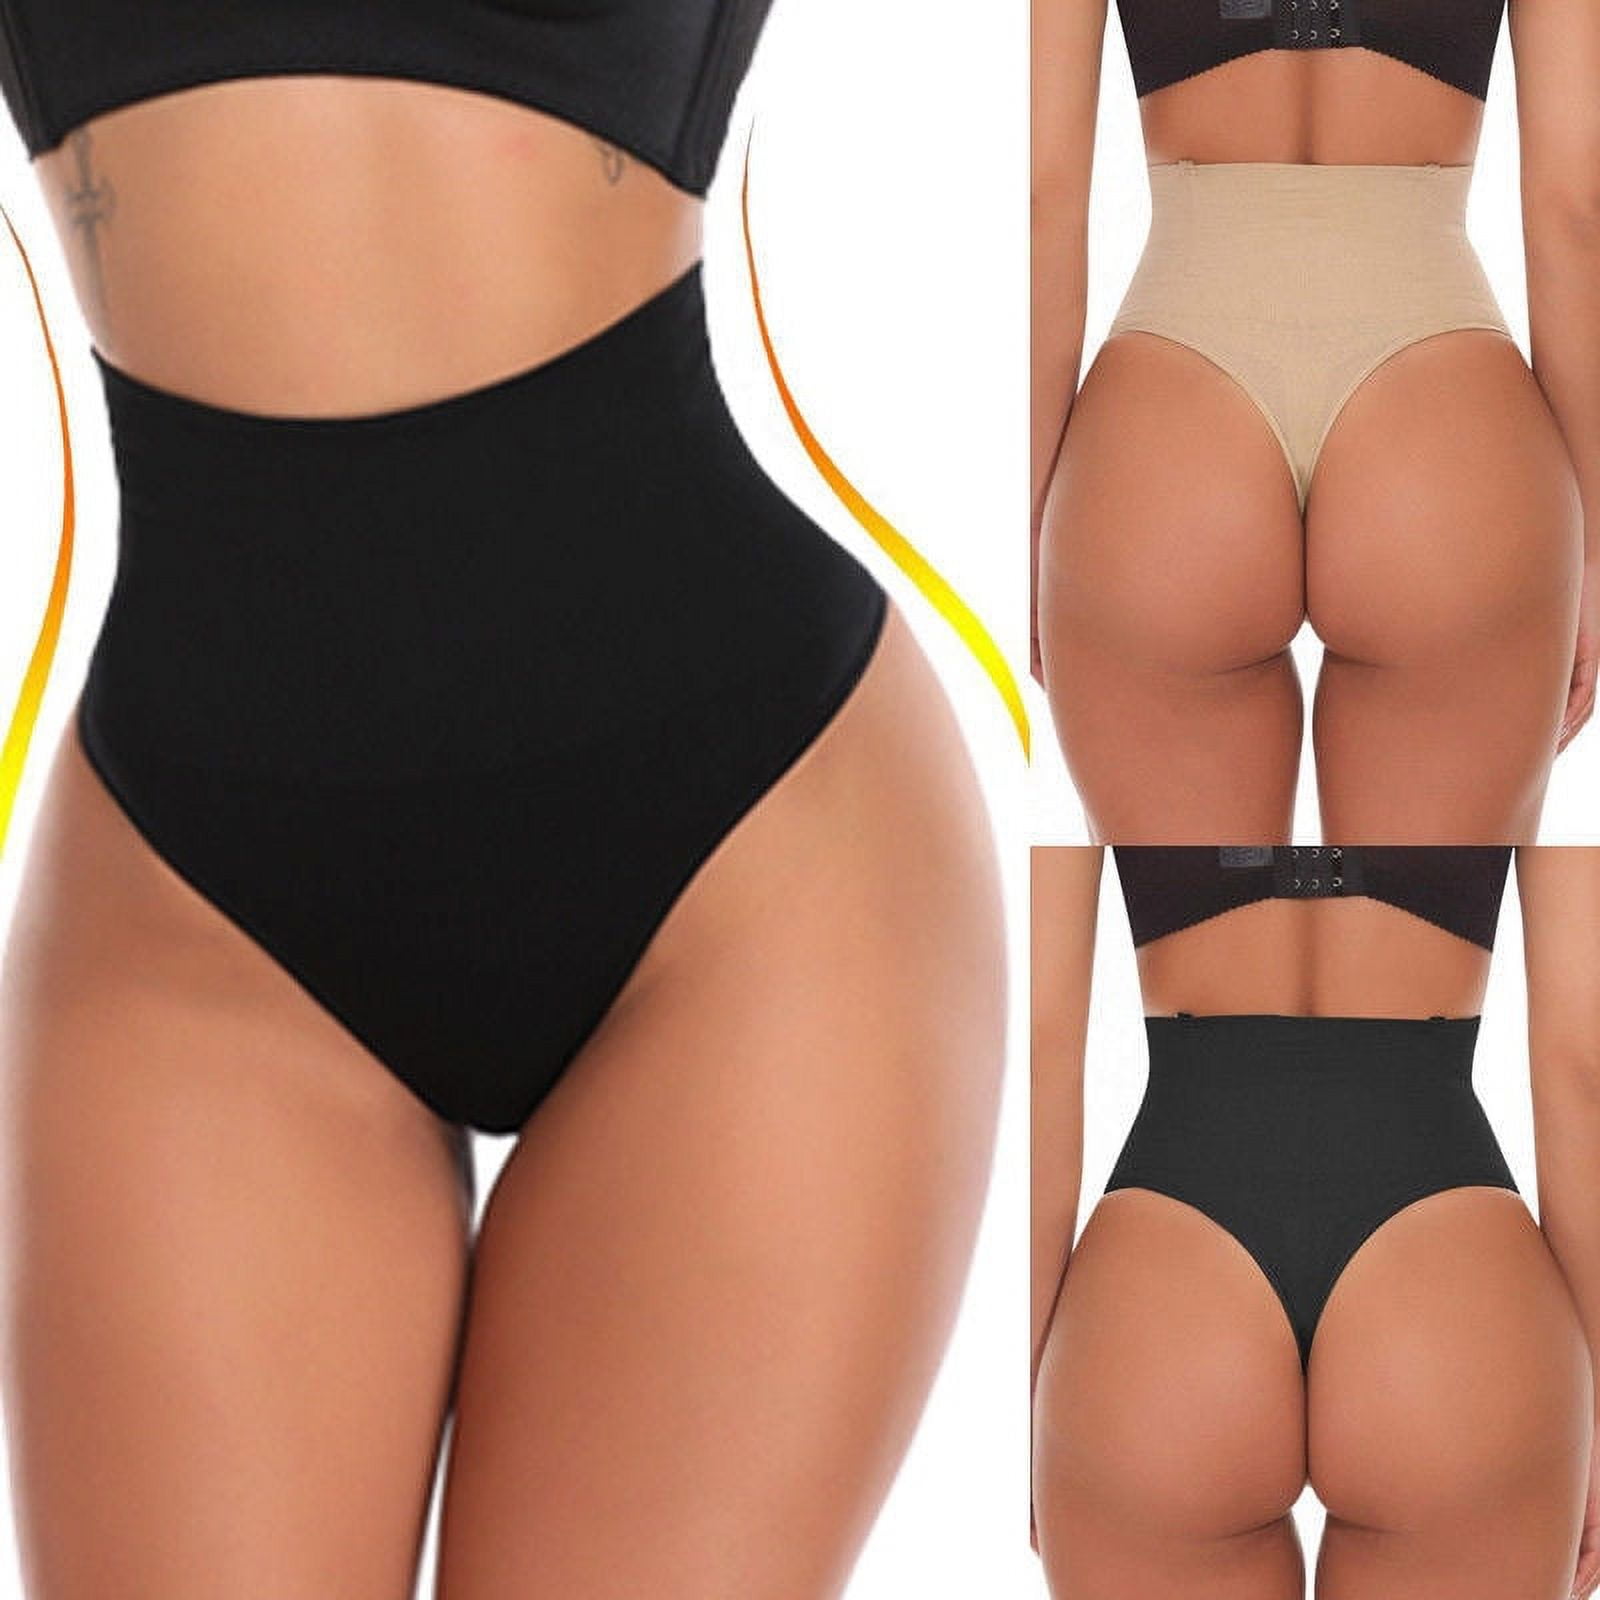 Honeeladyy sexy shapewear for women crotchless Women Waist Trainer Body  Shaper Corset Tummy Slimming Girdles Shaping Clothes